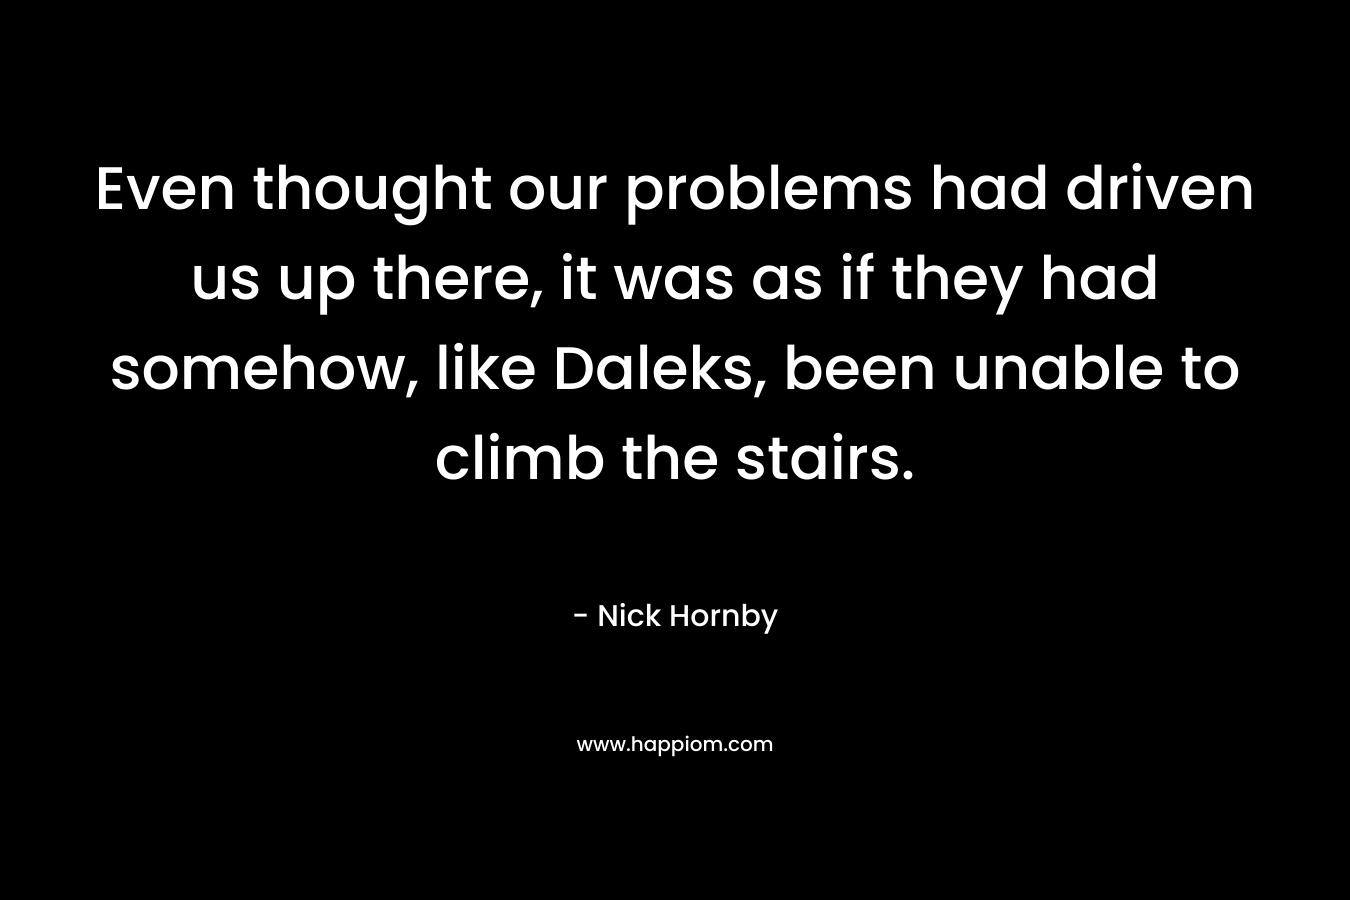 Even thought our problems had driven us up there, it was as if they had somehow, like Daleks, been unable to climb the stairs.